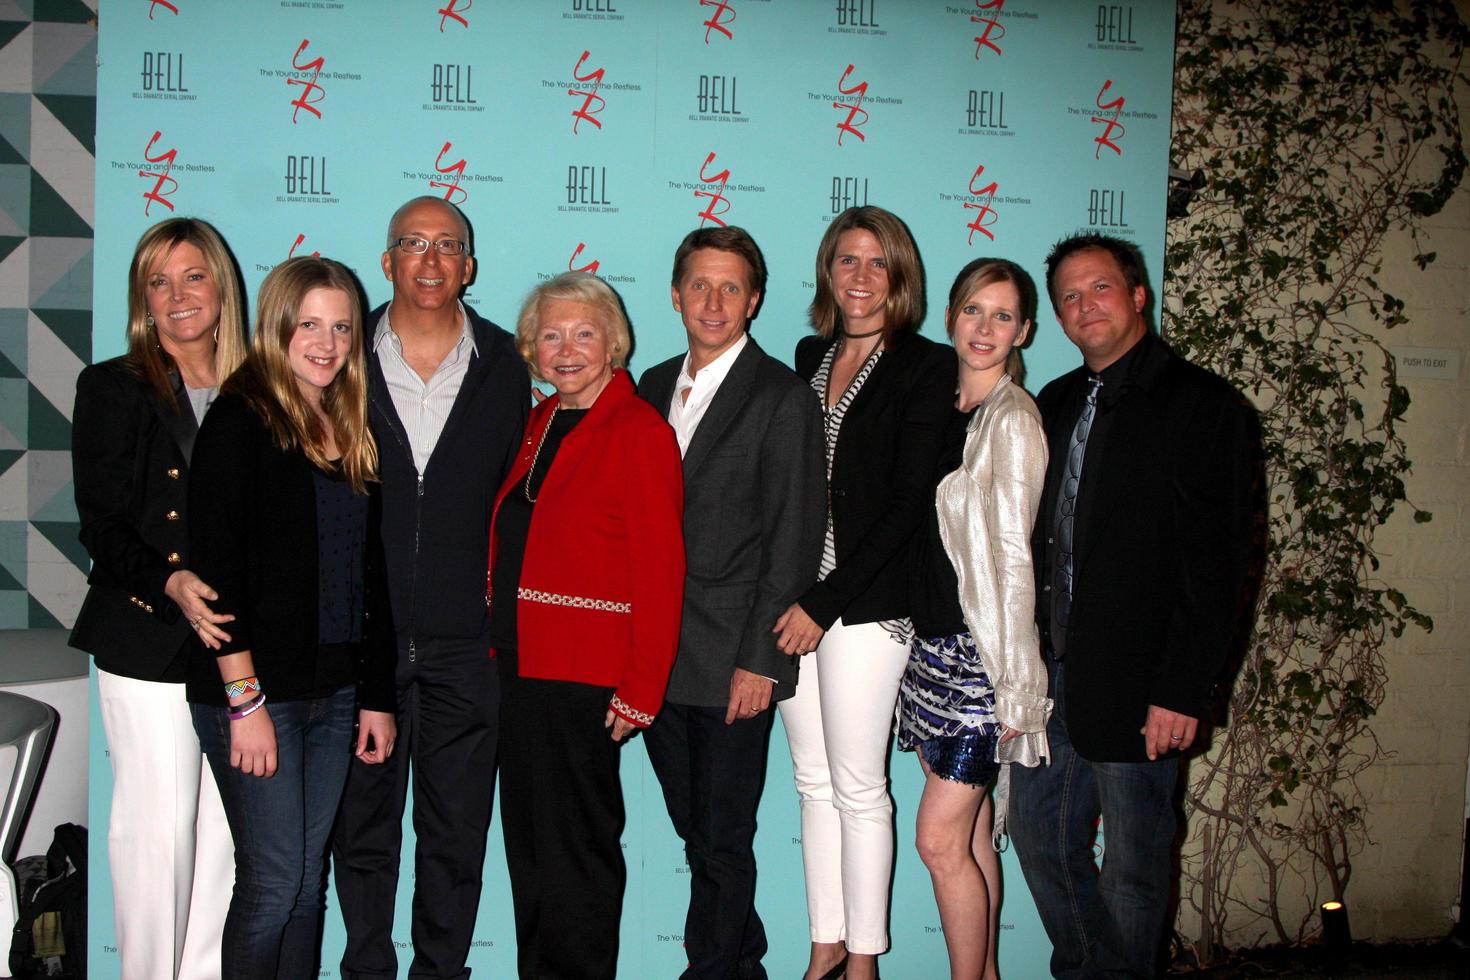 LOS ANGELES, MAR 18 - Maria, Sabrina, Bill Jr, Lee, Brad, Colleen, Lauralee Bell, and Scott Martin arriving at The Young and the Restless 38th Anniversary Party Hosted by The Bell Family at Avalon Hotel on March 18, 2011 in Beverly HIlls, CA photo